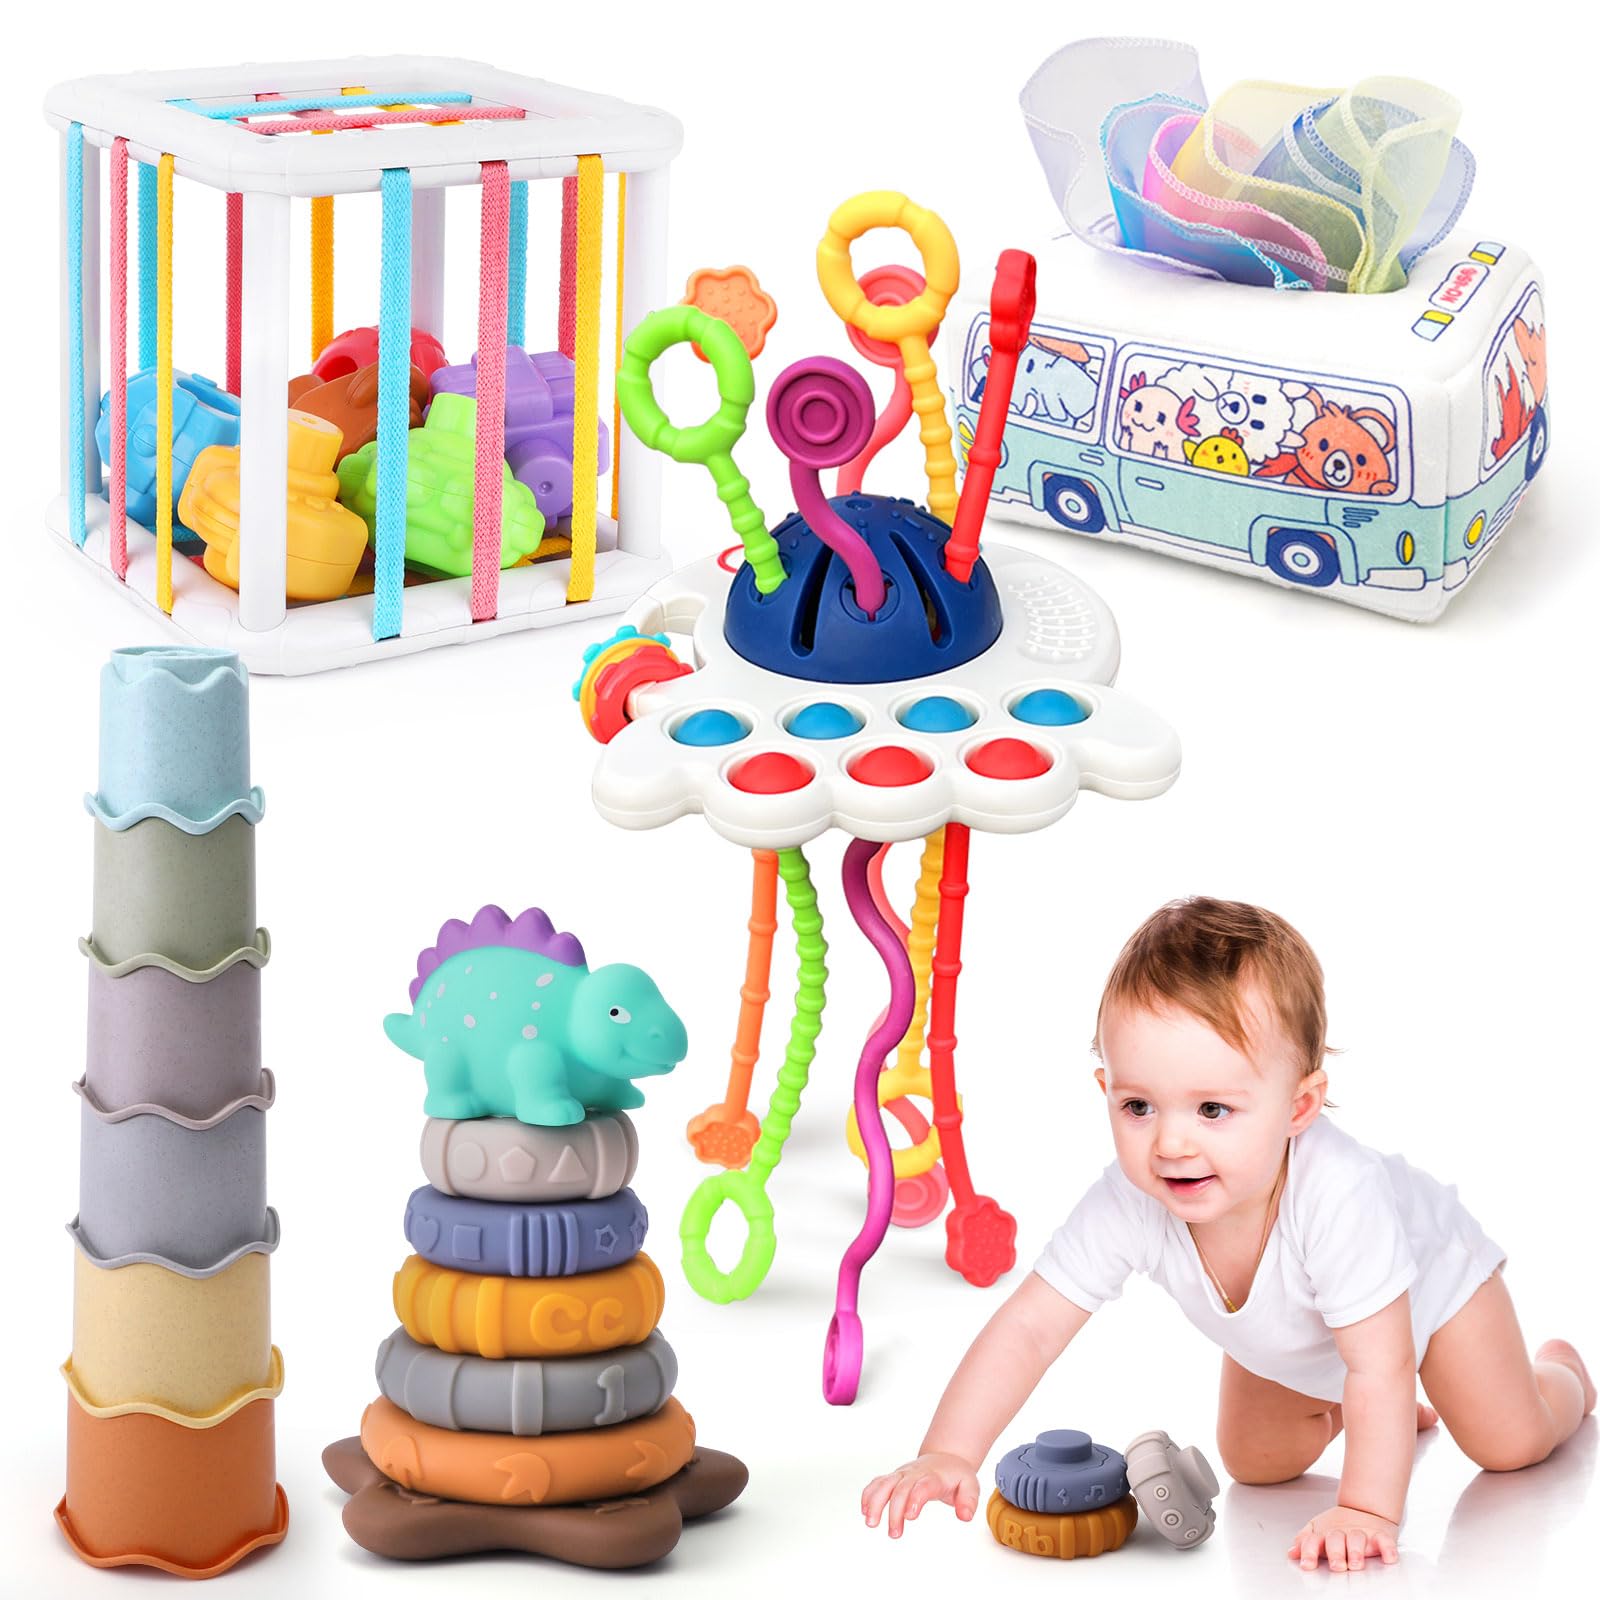 5 in 1 Baby Montessori Toys Set Include Shape Sorter Bin with Sound, Baby Tissue Box, Stacking Cups, Pull String Toy, Soft Stacking Rings, Sensory Toys for Infants Toddlers